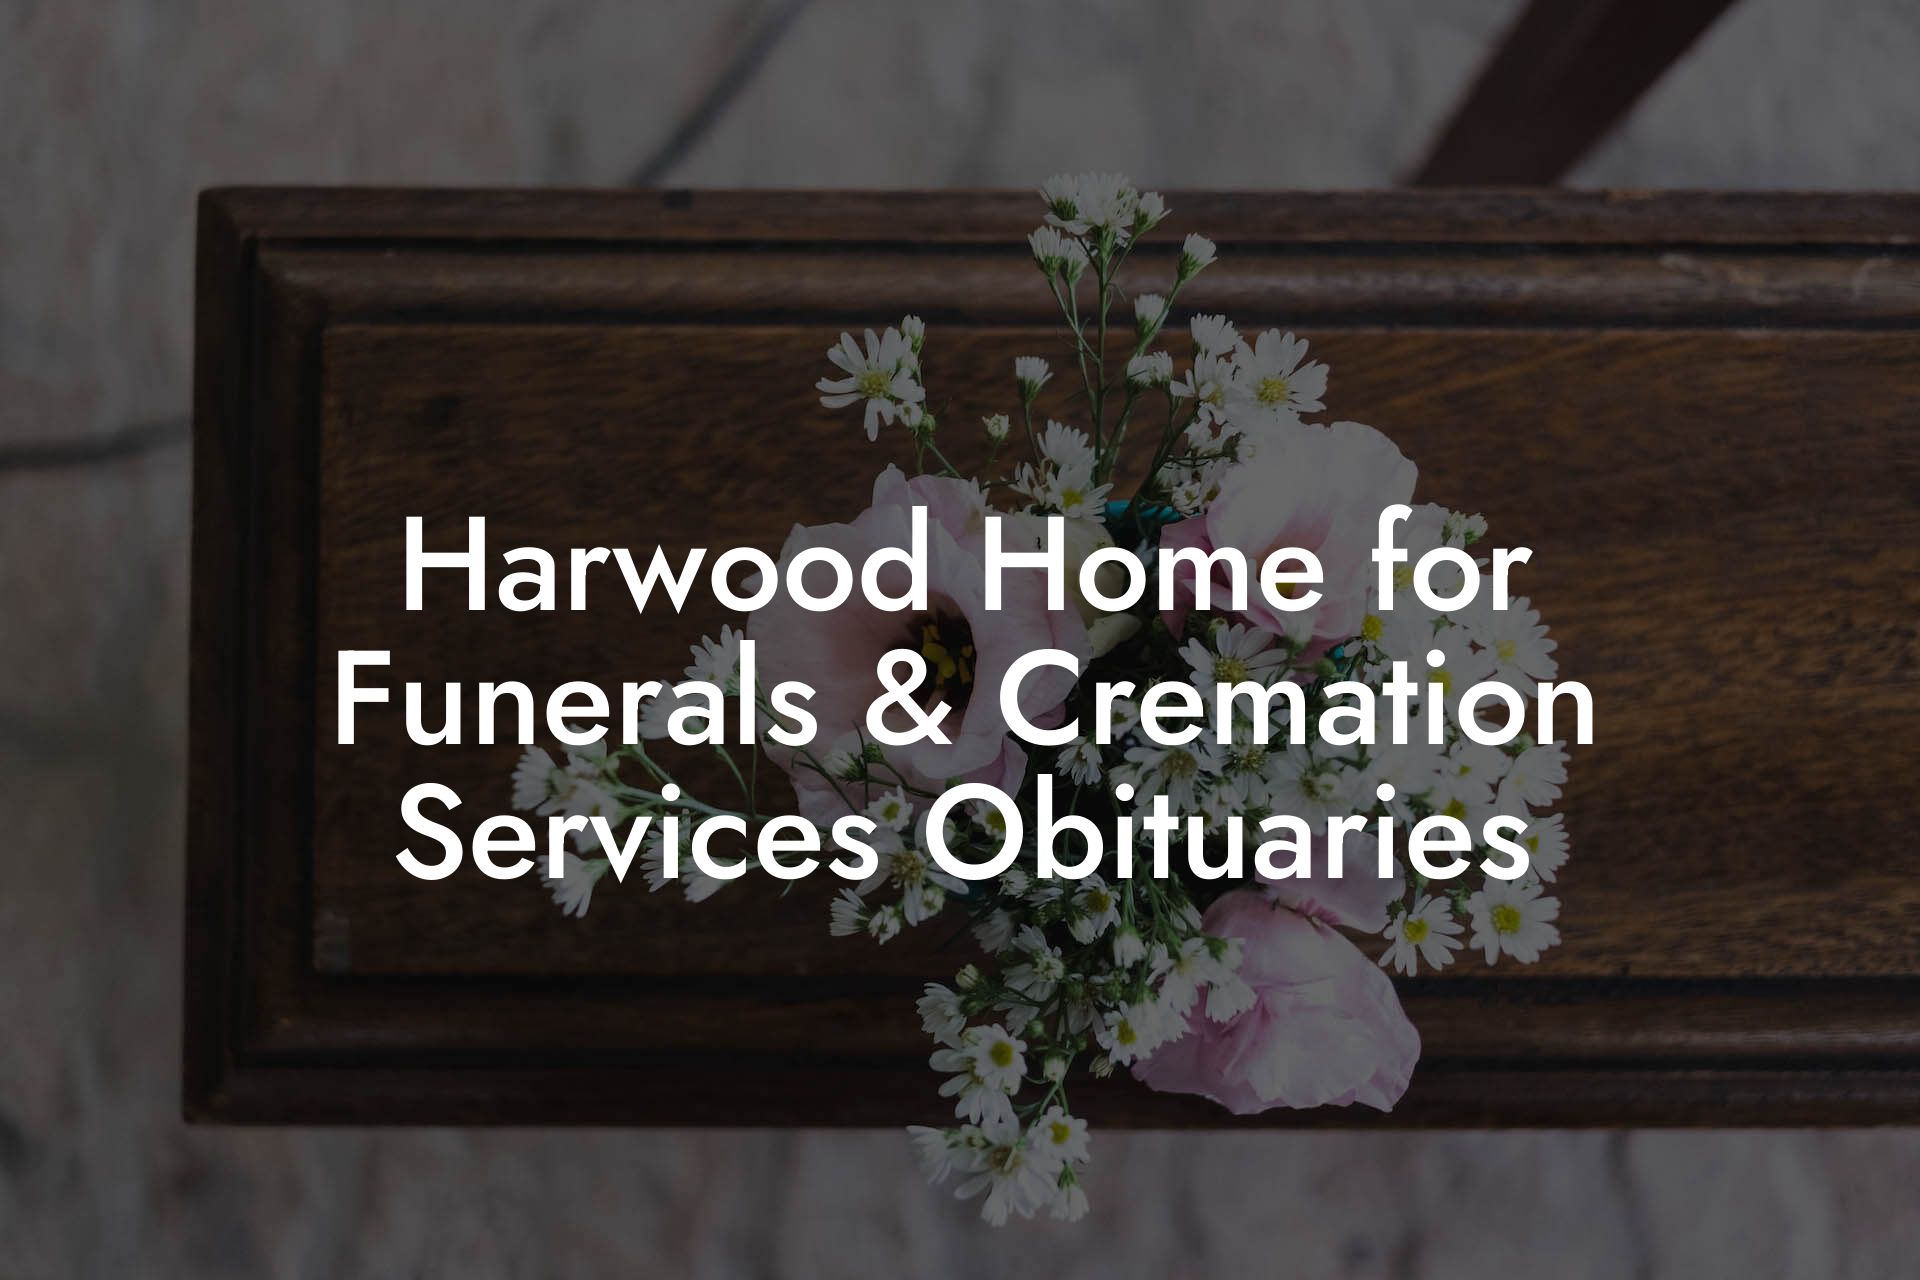 Harwood Home for Funerals & Cremation Services Obituaries Eulogy